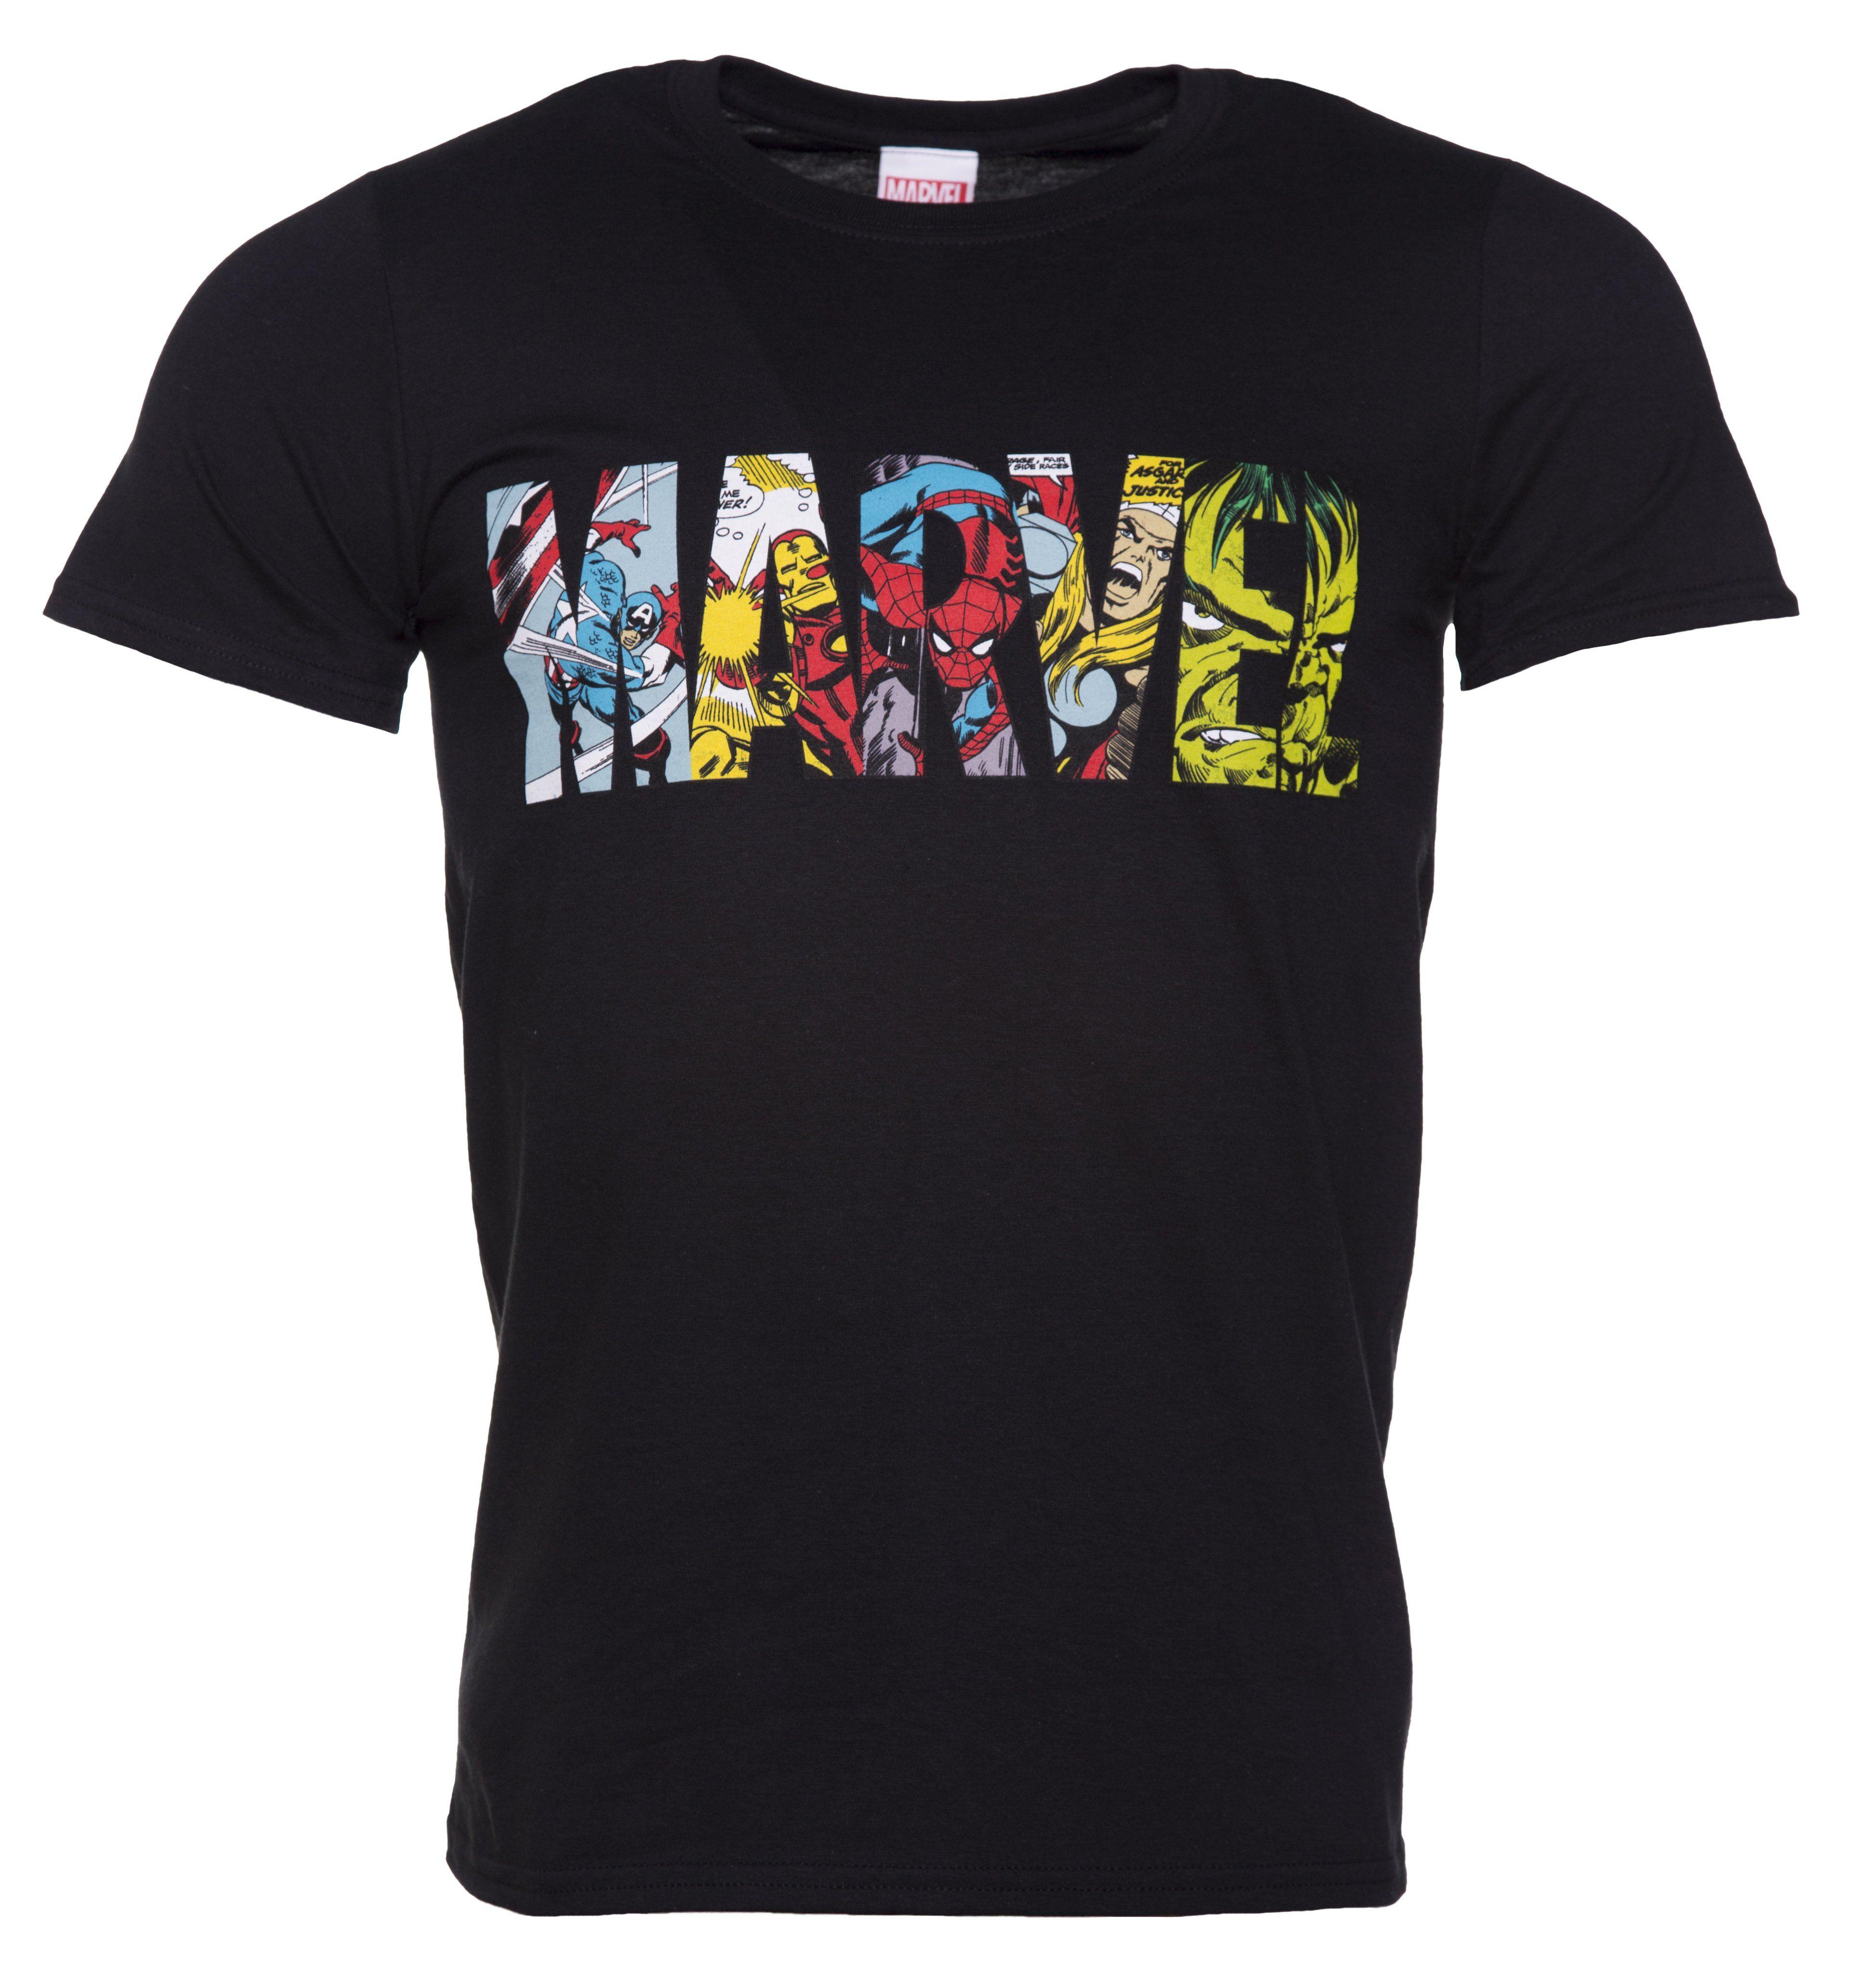 Comic strip style personalised t shirt